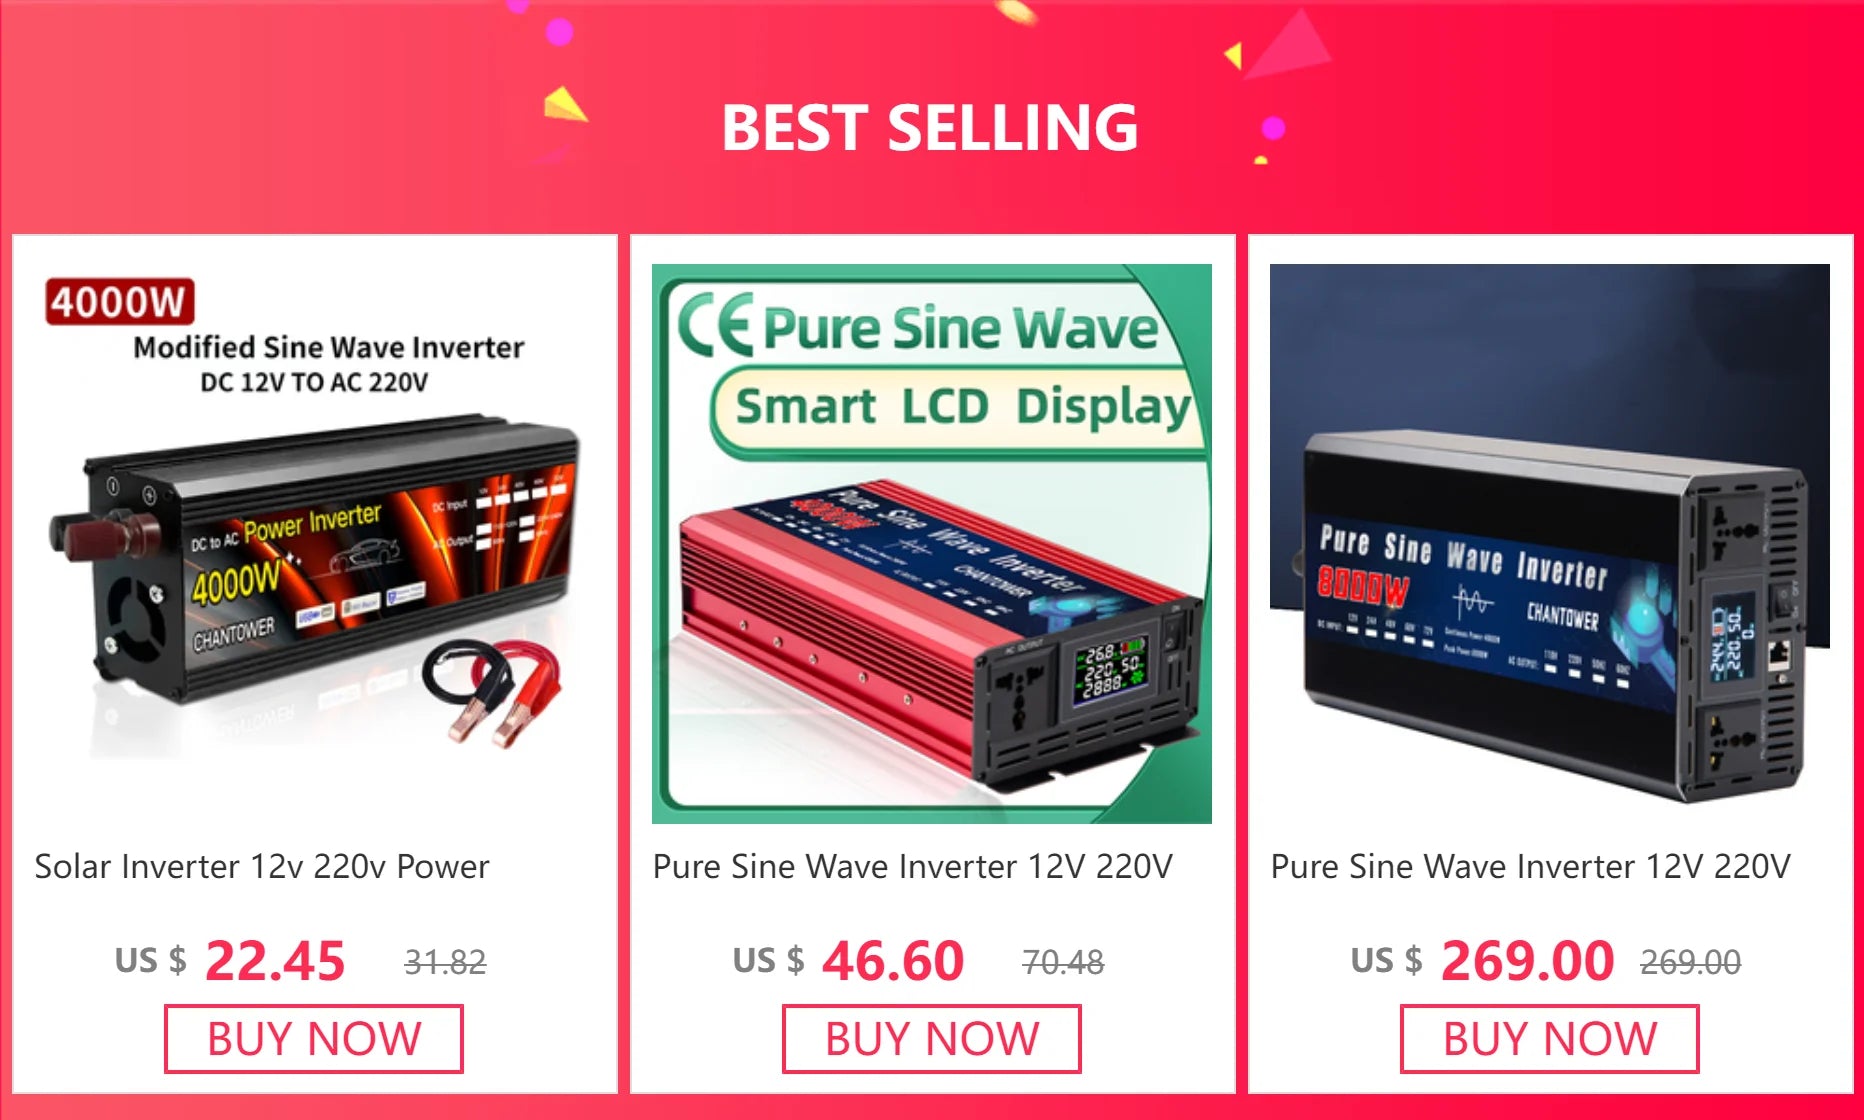 Best-selling solar inverter with pure sine wave technology and smart LCD display.